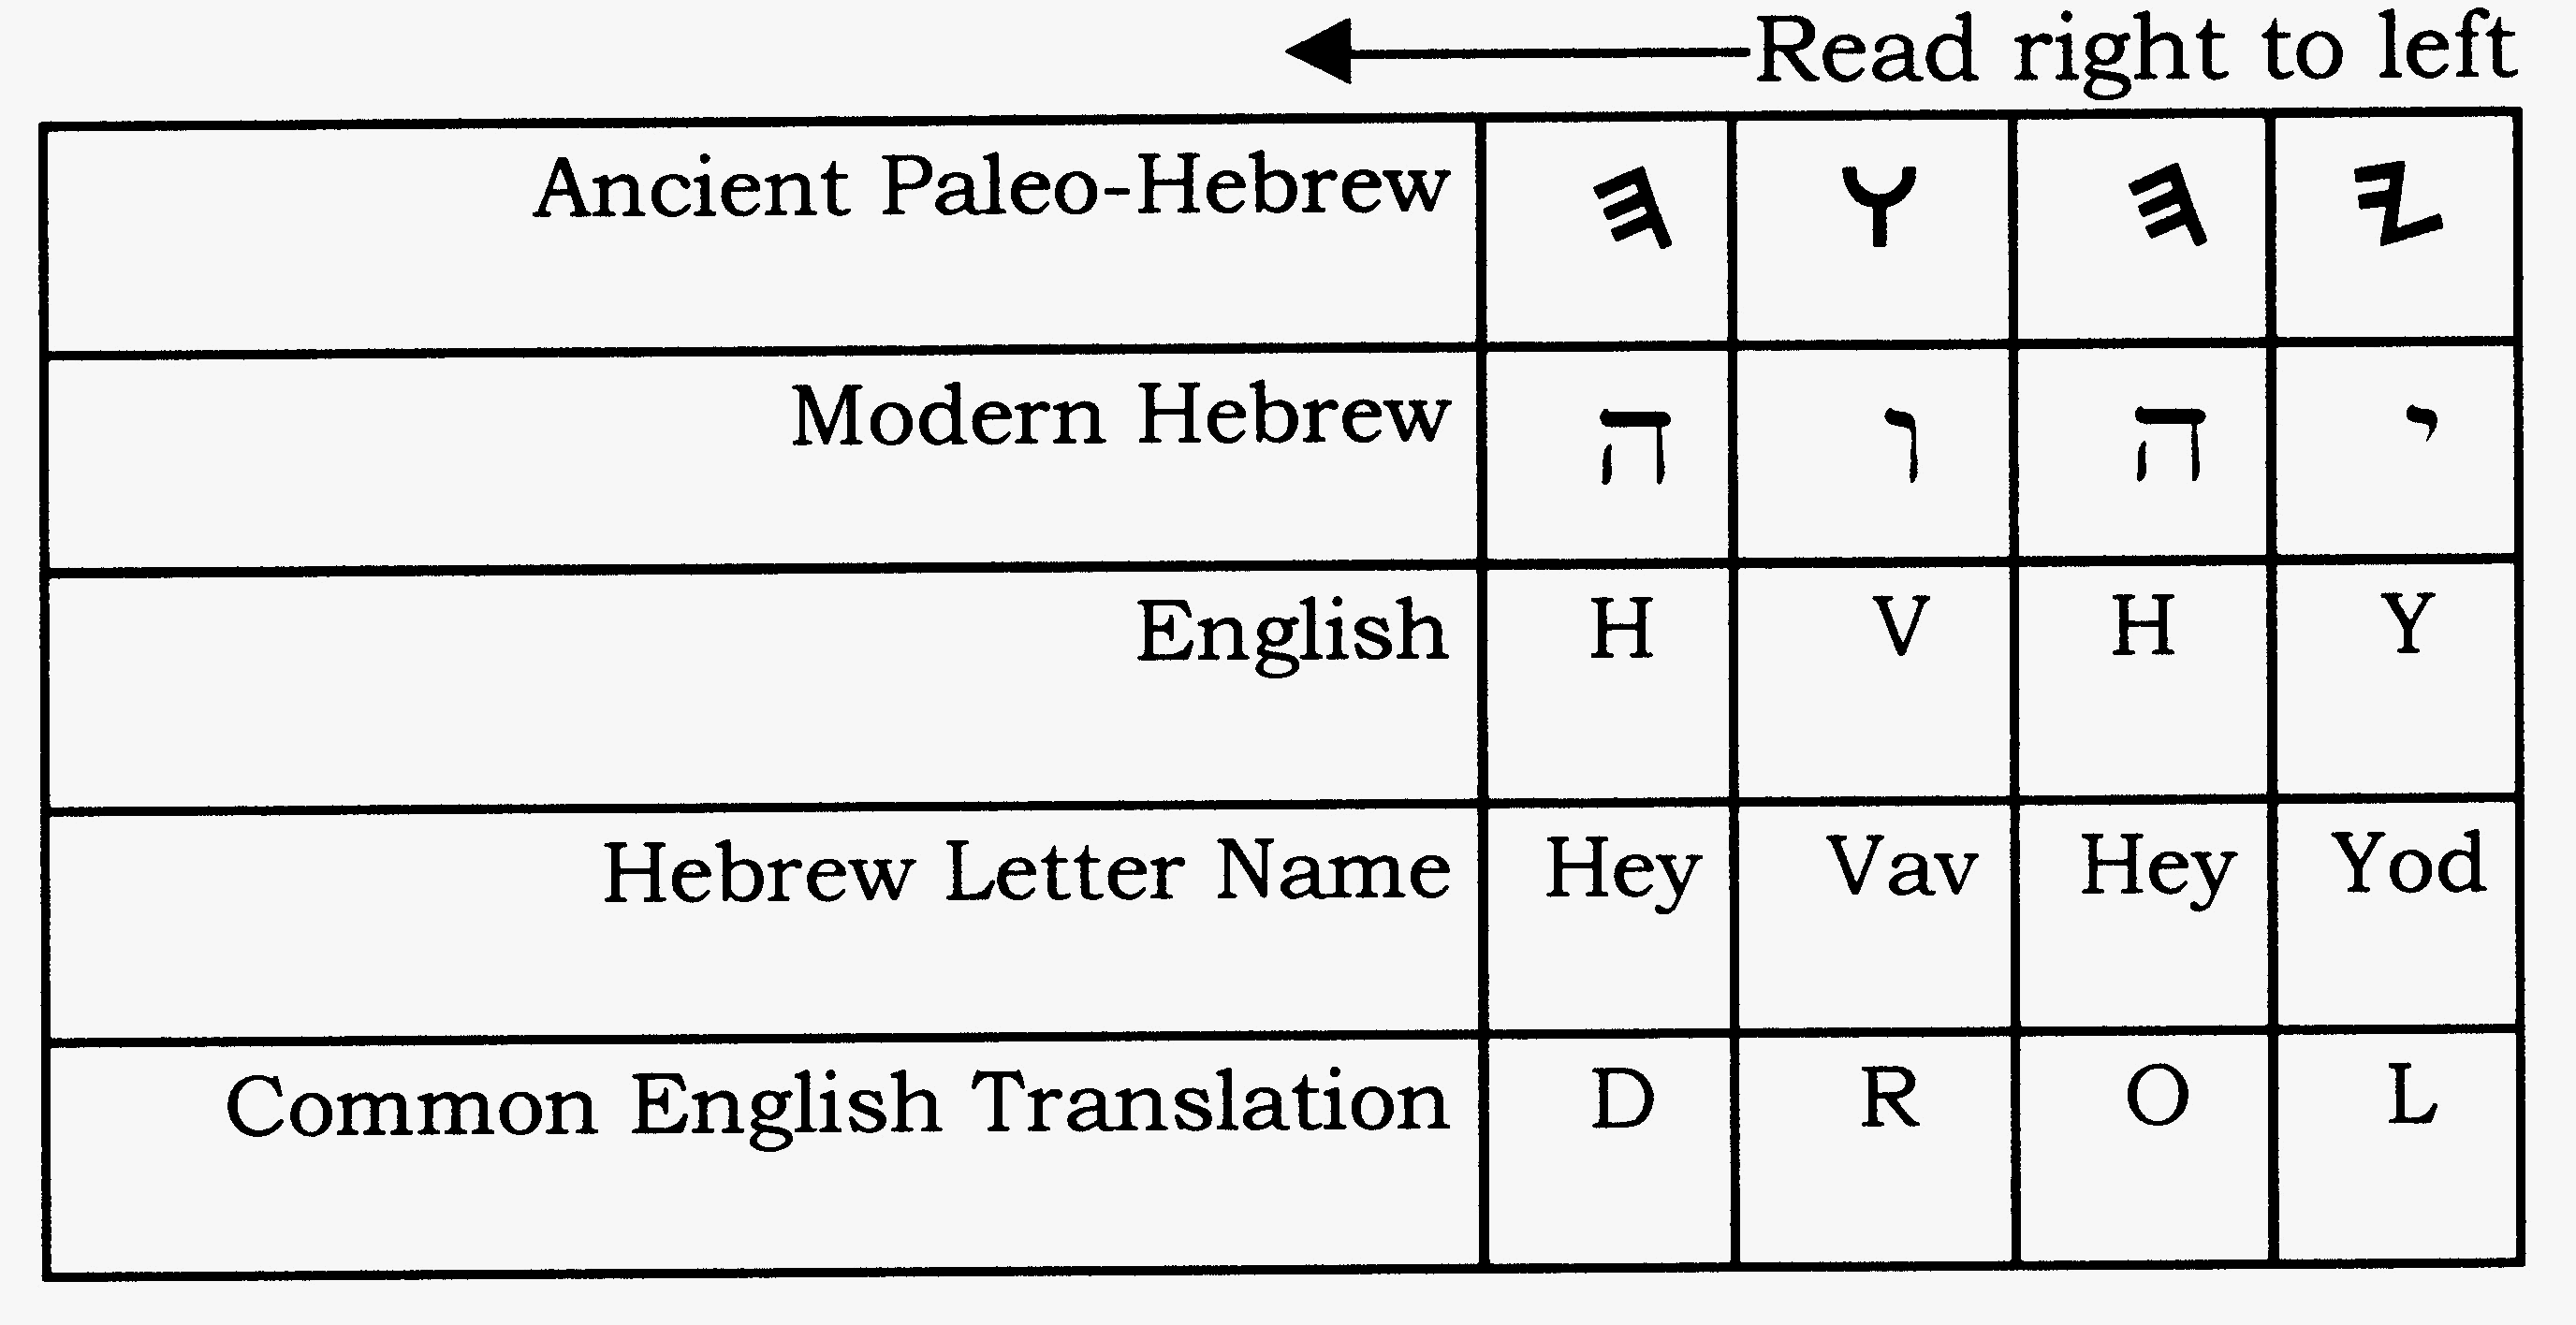 The True Name of God mystical knowledge Yehovah spelling